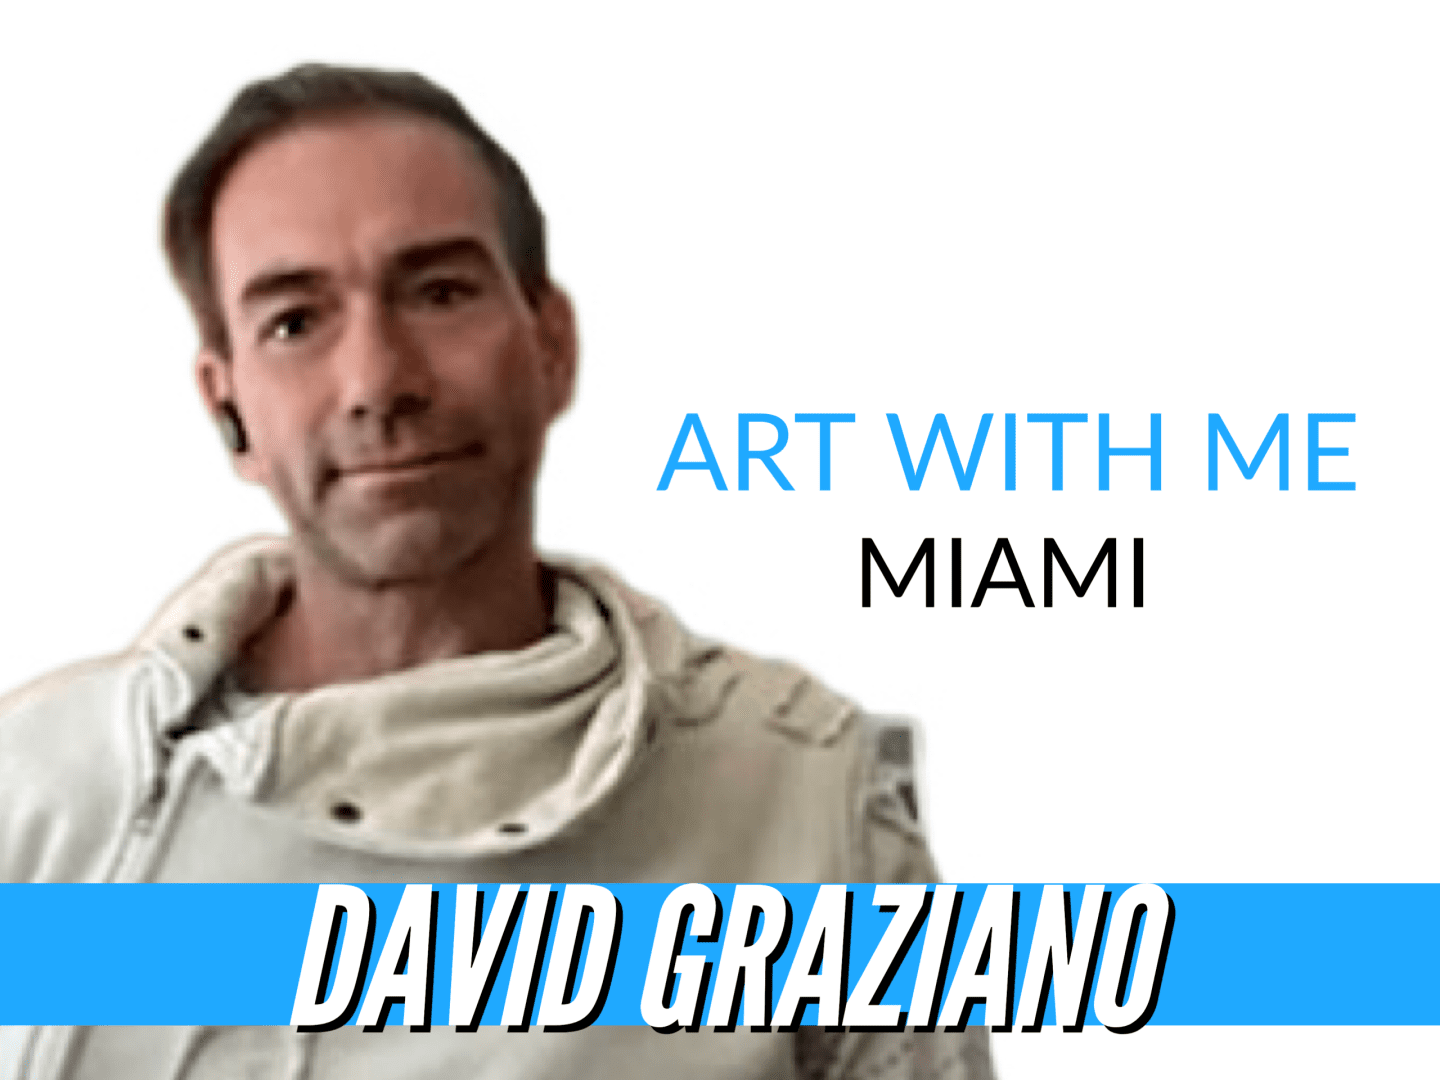 David Graziano turns life experiences into Art With Me festival